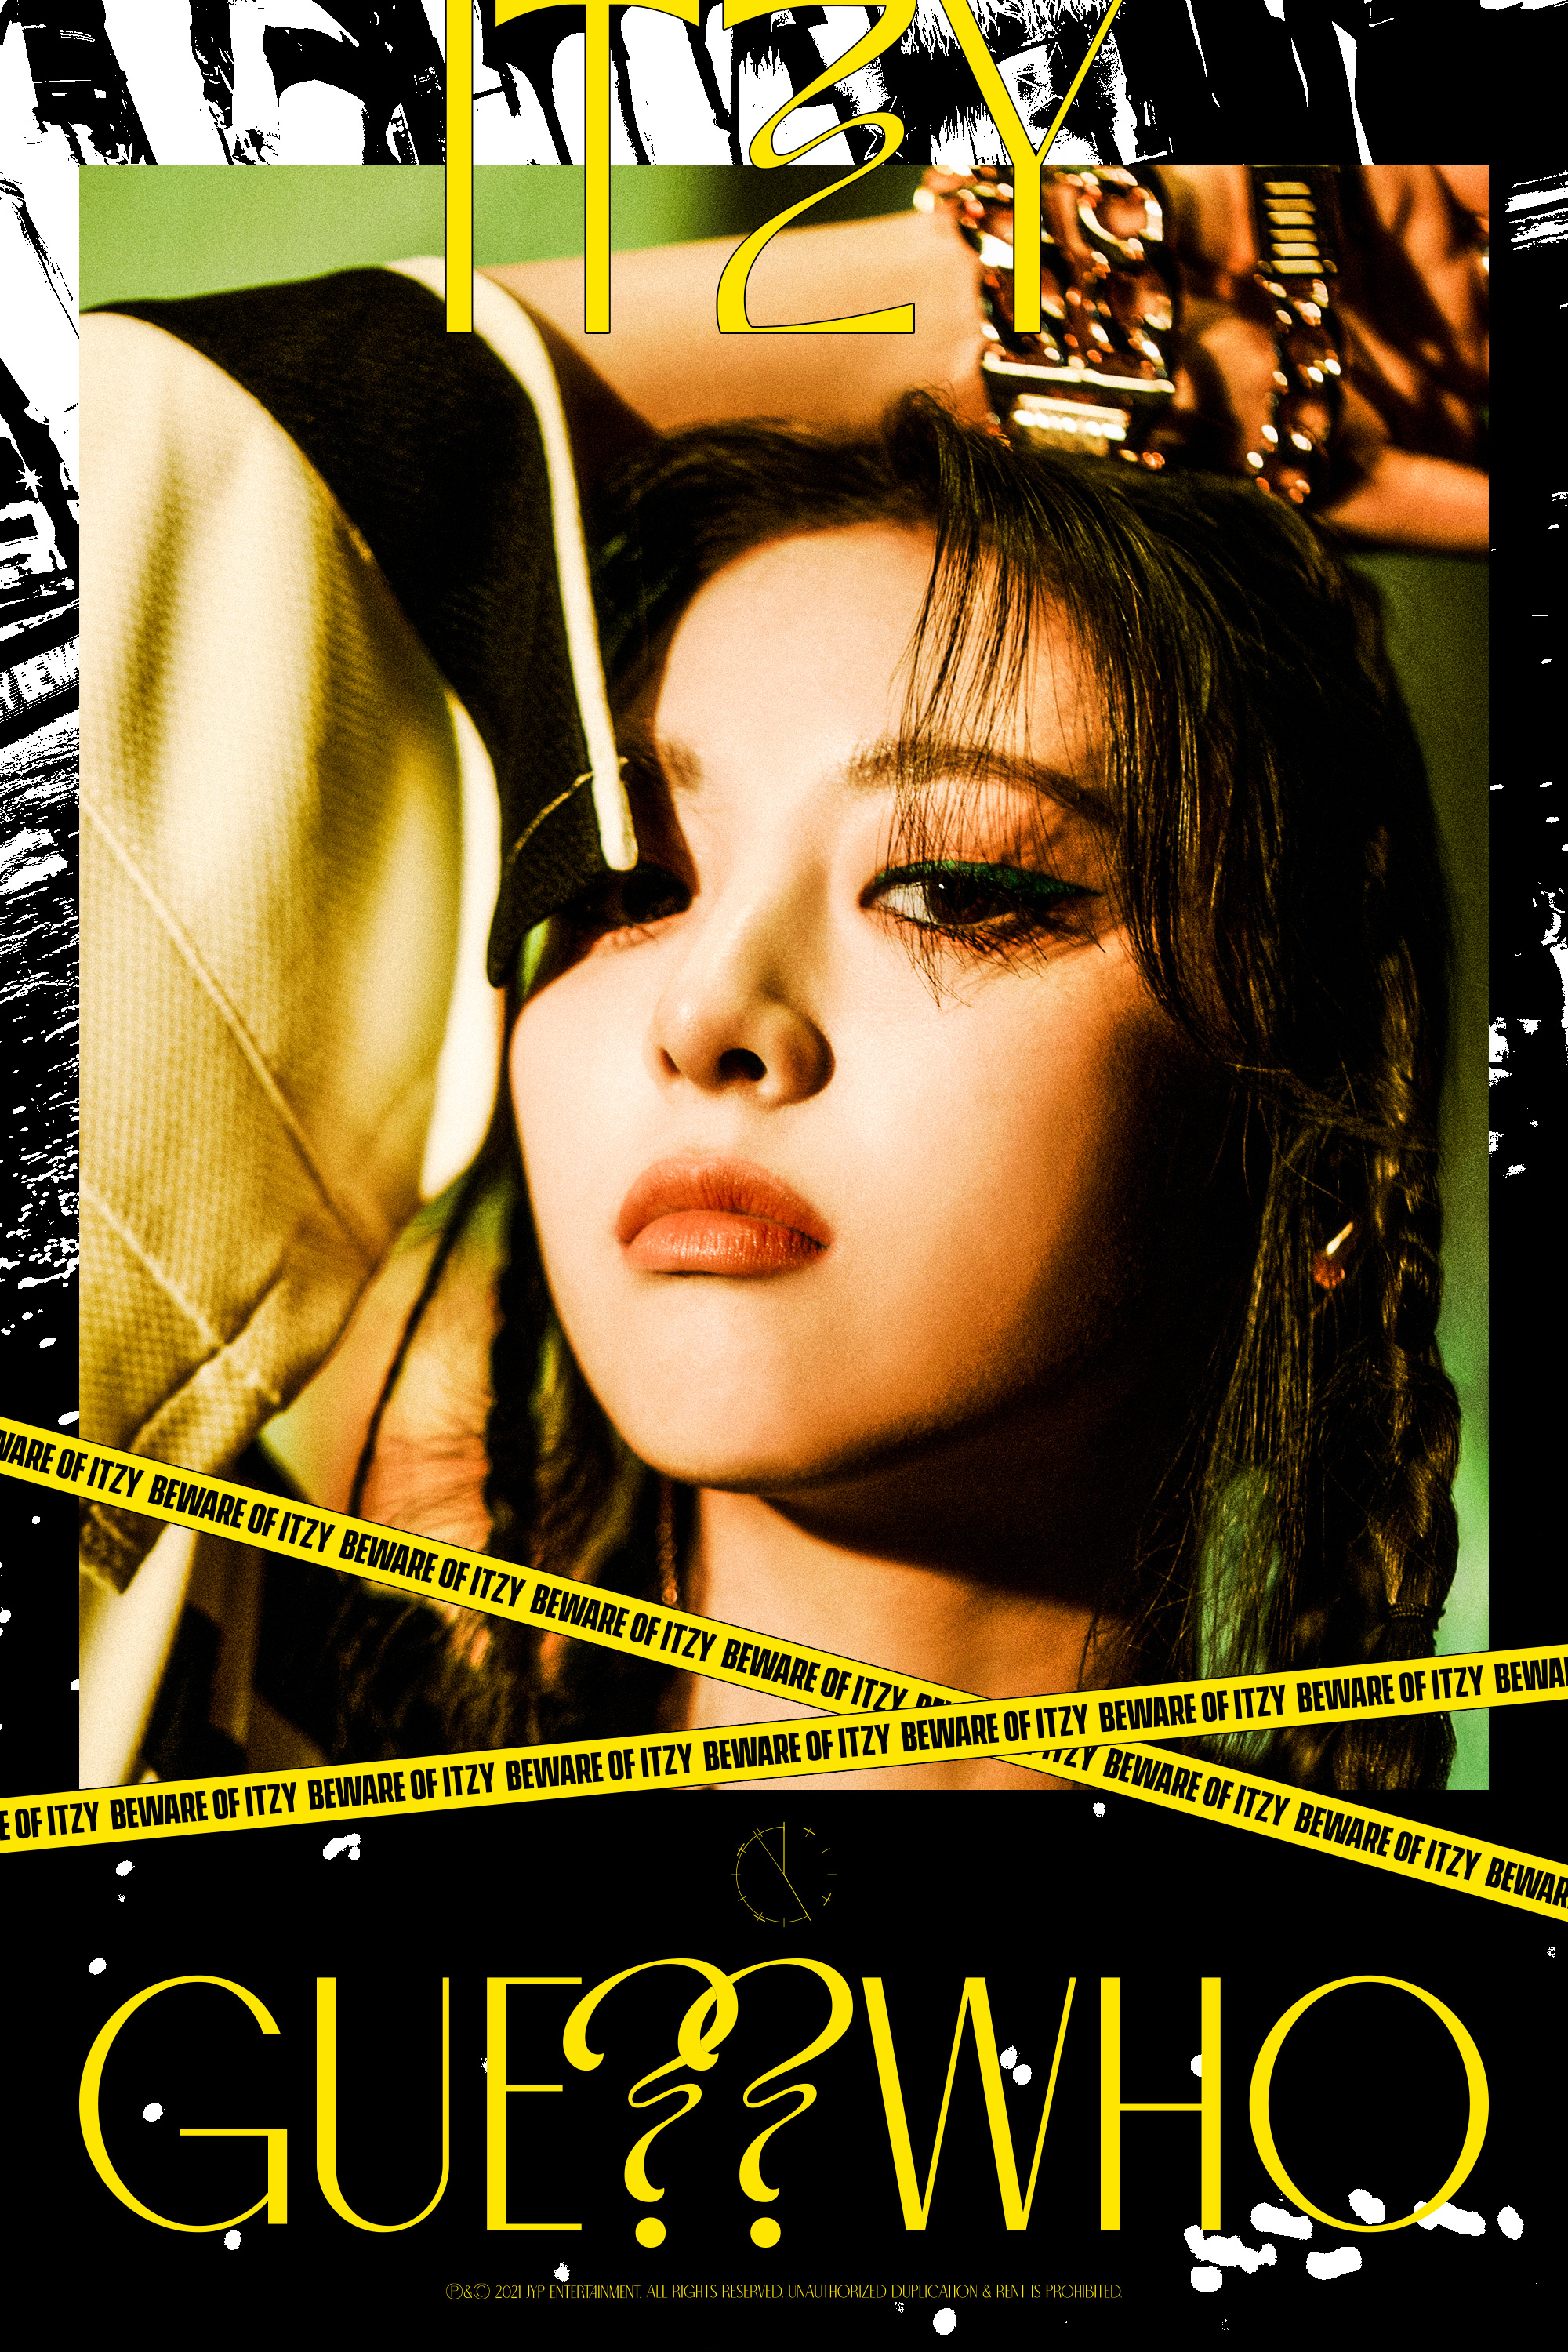 ITZY Yuna Guess Who Night Teaser